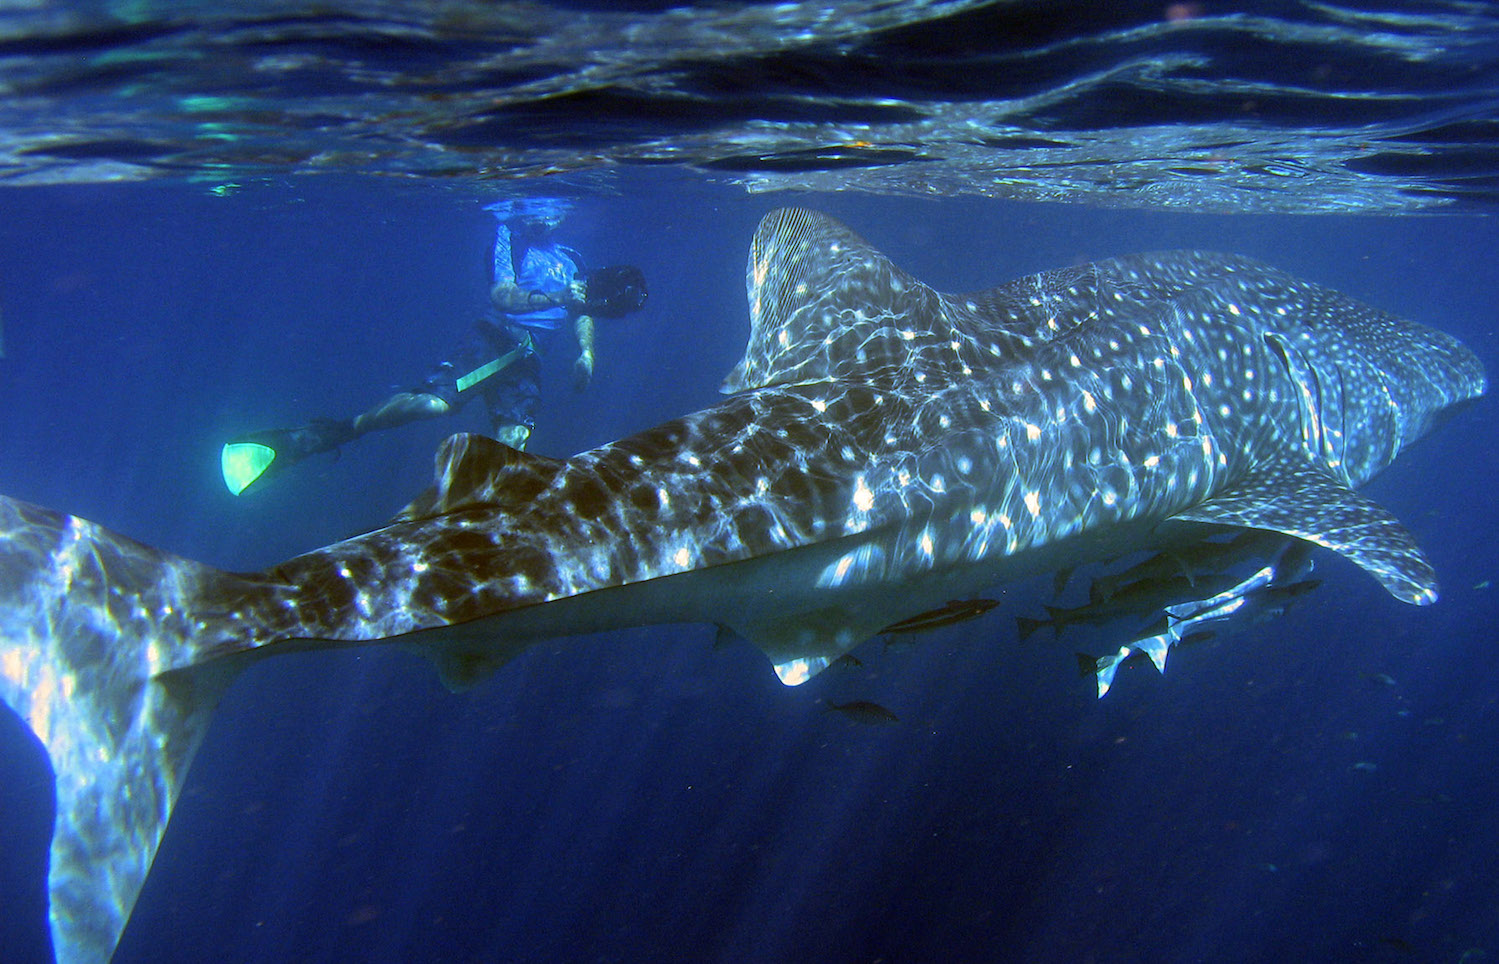 One of the unique and exclusive Australian experiences is the swimming with whale sharks at Ningaloo Reef